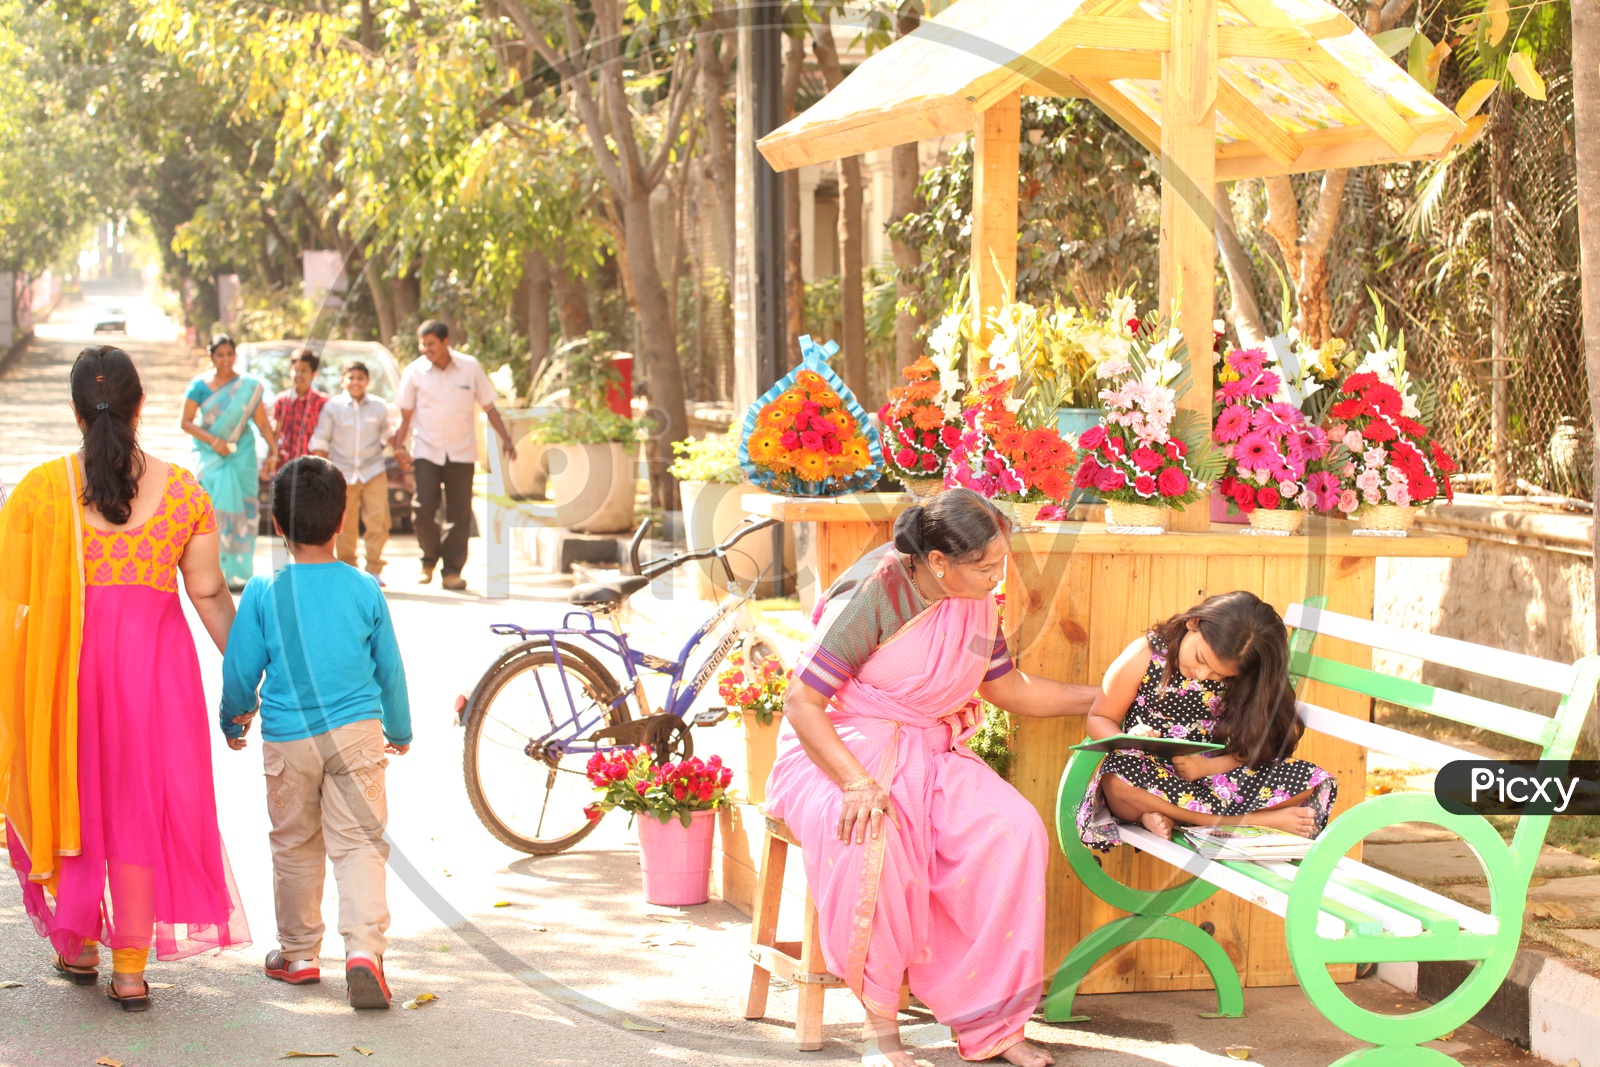 A girl Child reading on a Road Side Flower Vendor Shop in India